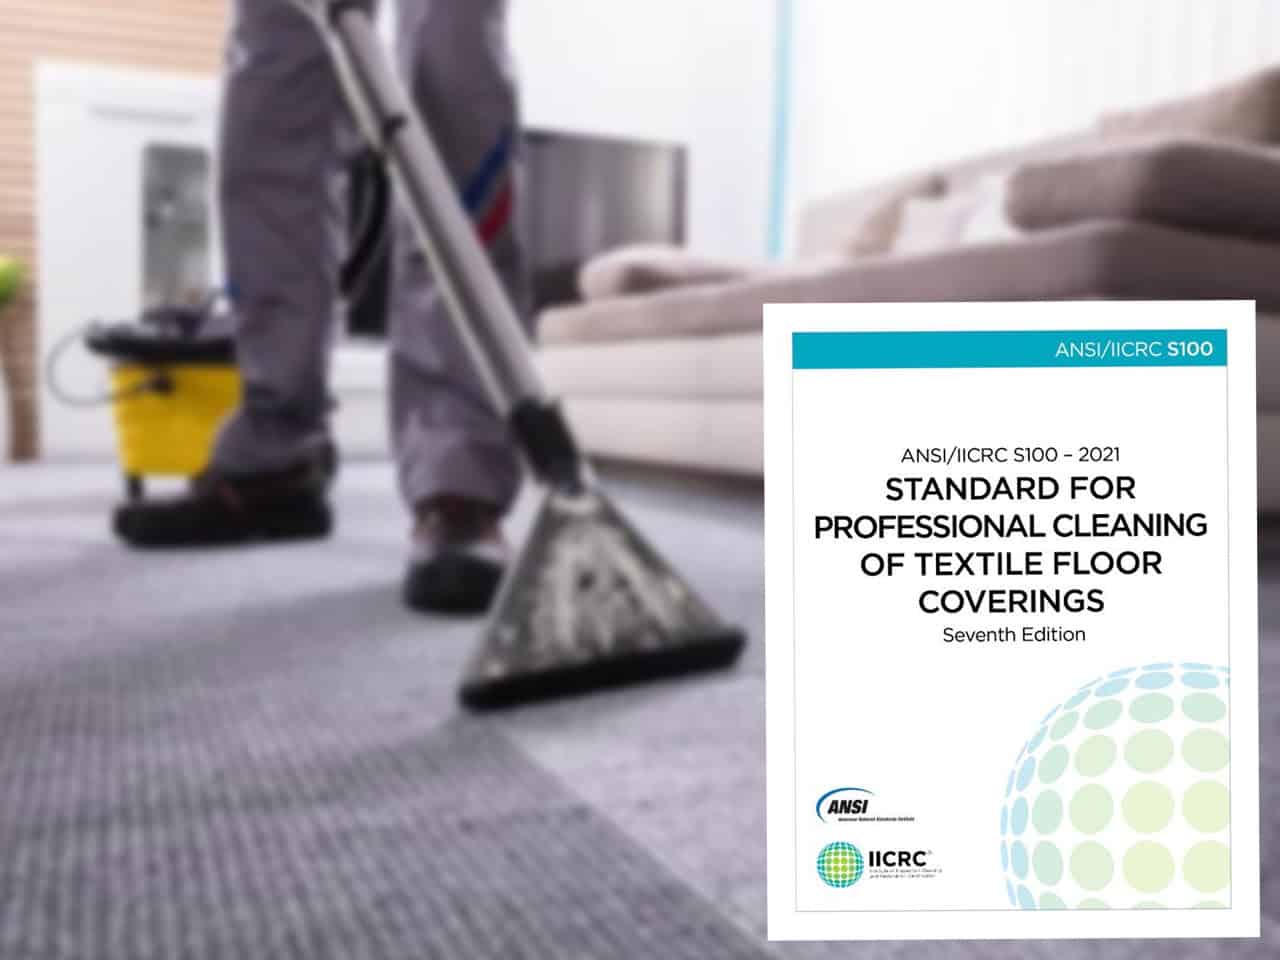 Standards Matter: Why Floor Care Providers Should Keep the S100 in Their Back Pockets